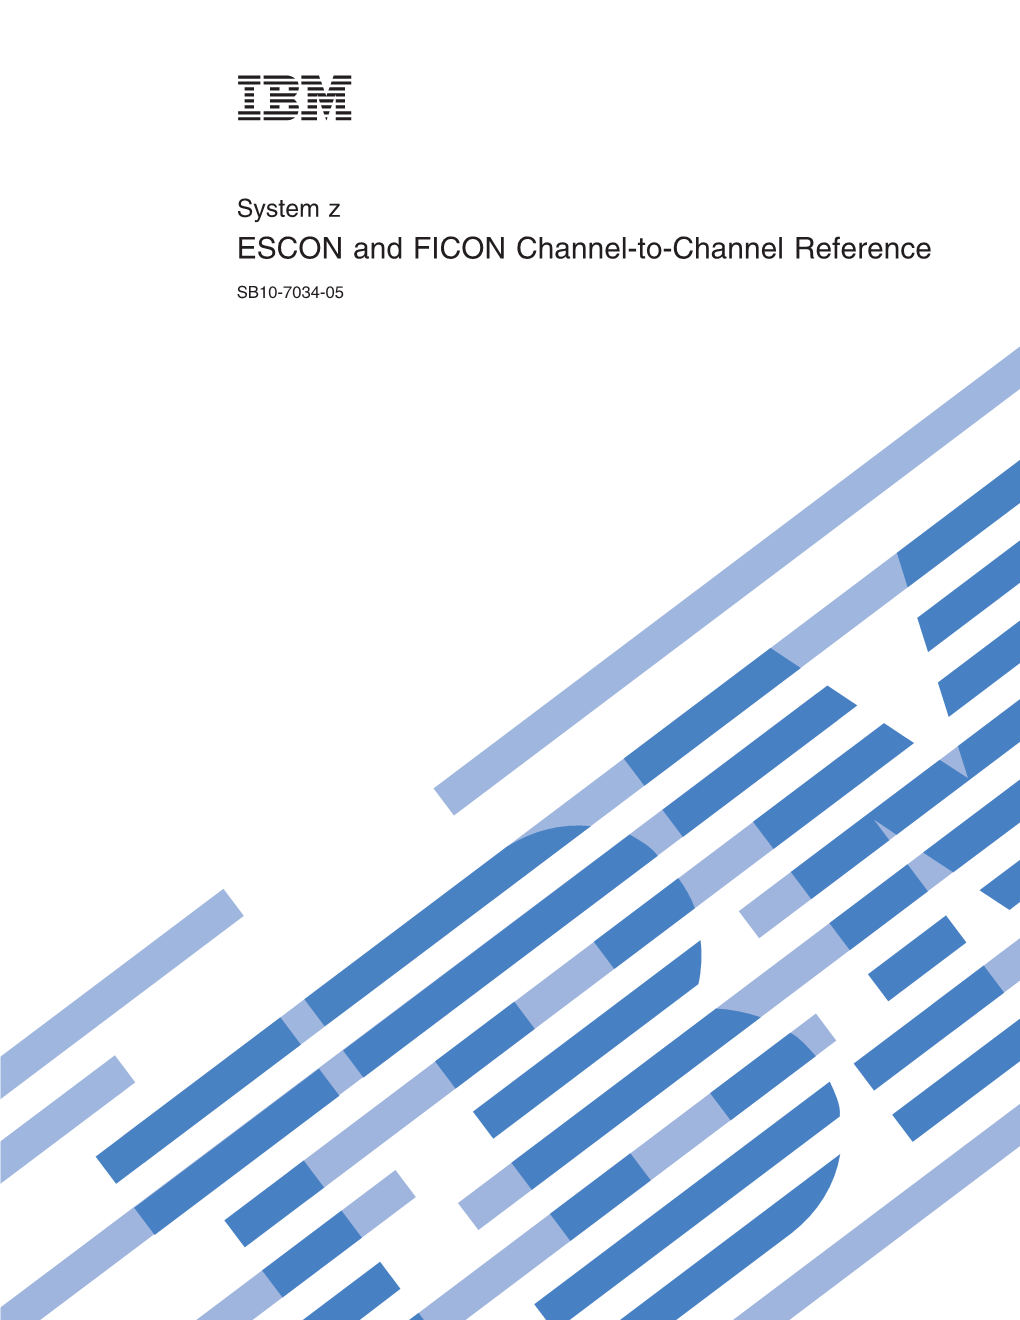 ESCON and FICON Channel-To-Channel Reference